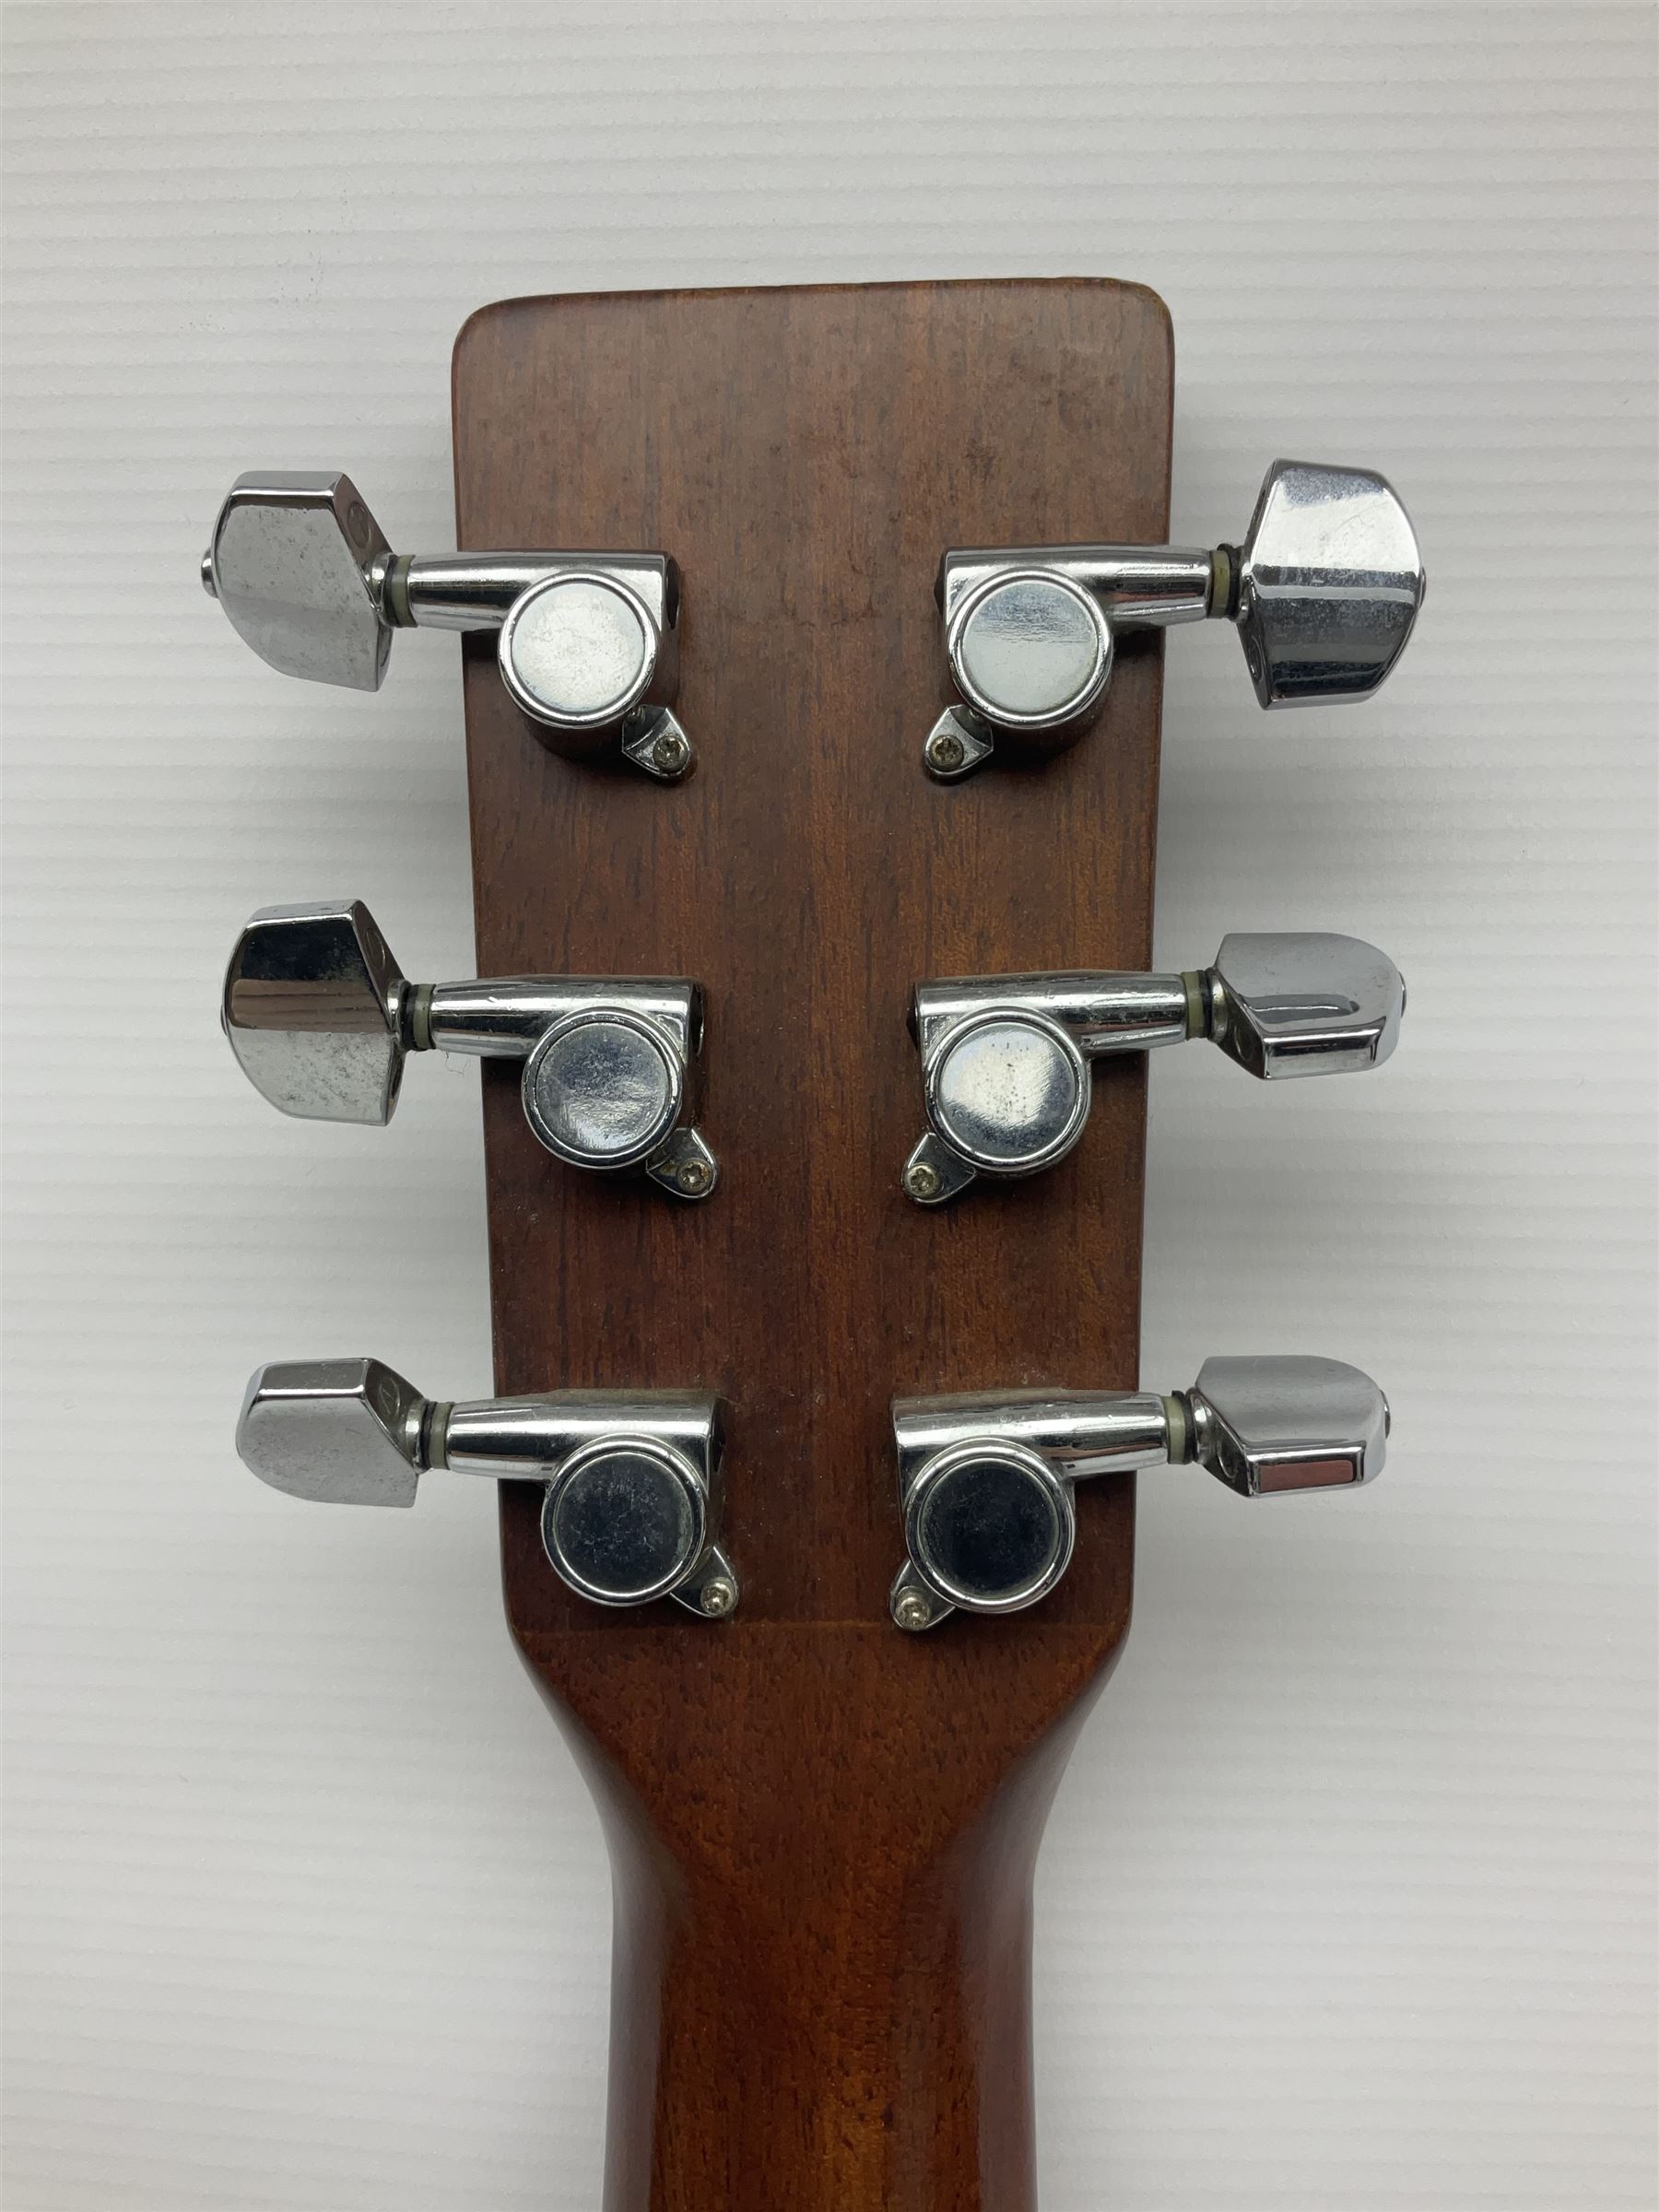 Tanglewood semi-acoustic guitar with Fishman preamp - Image 10 of 17